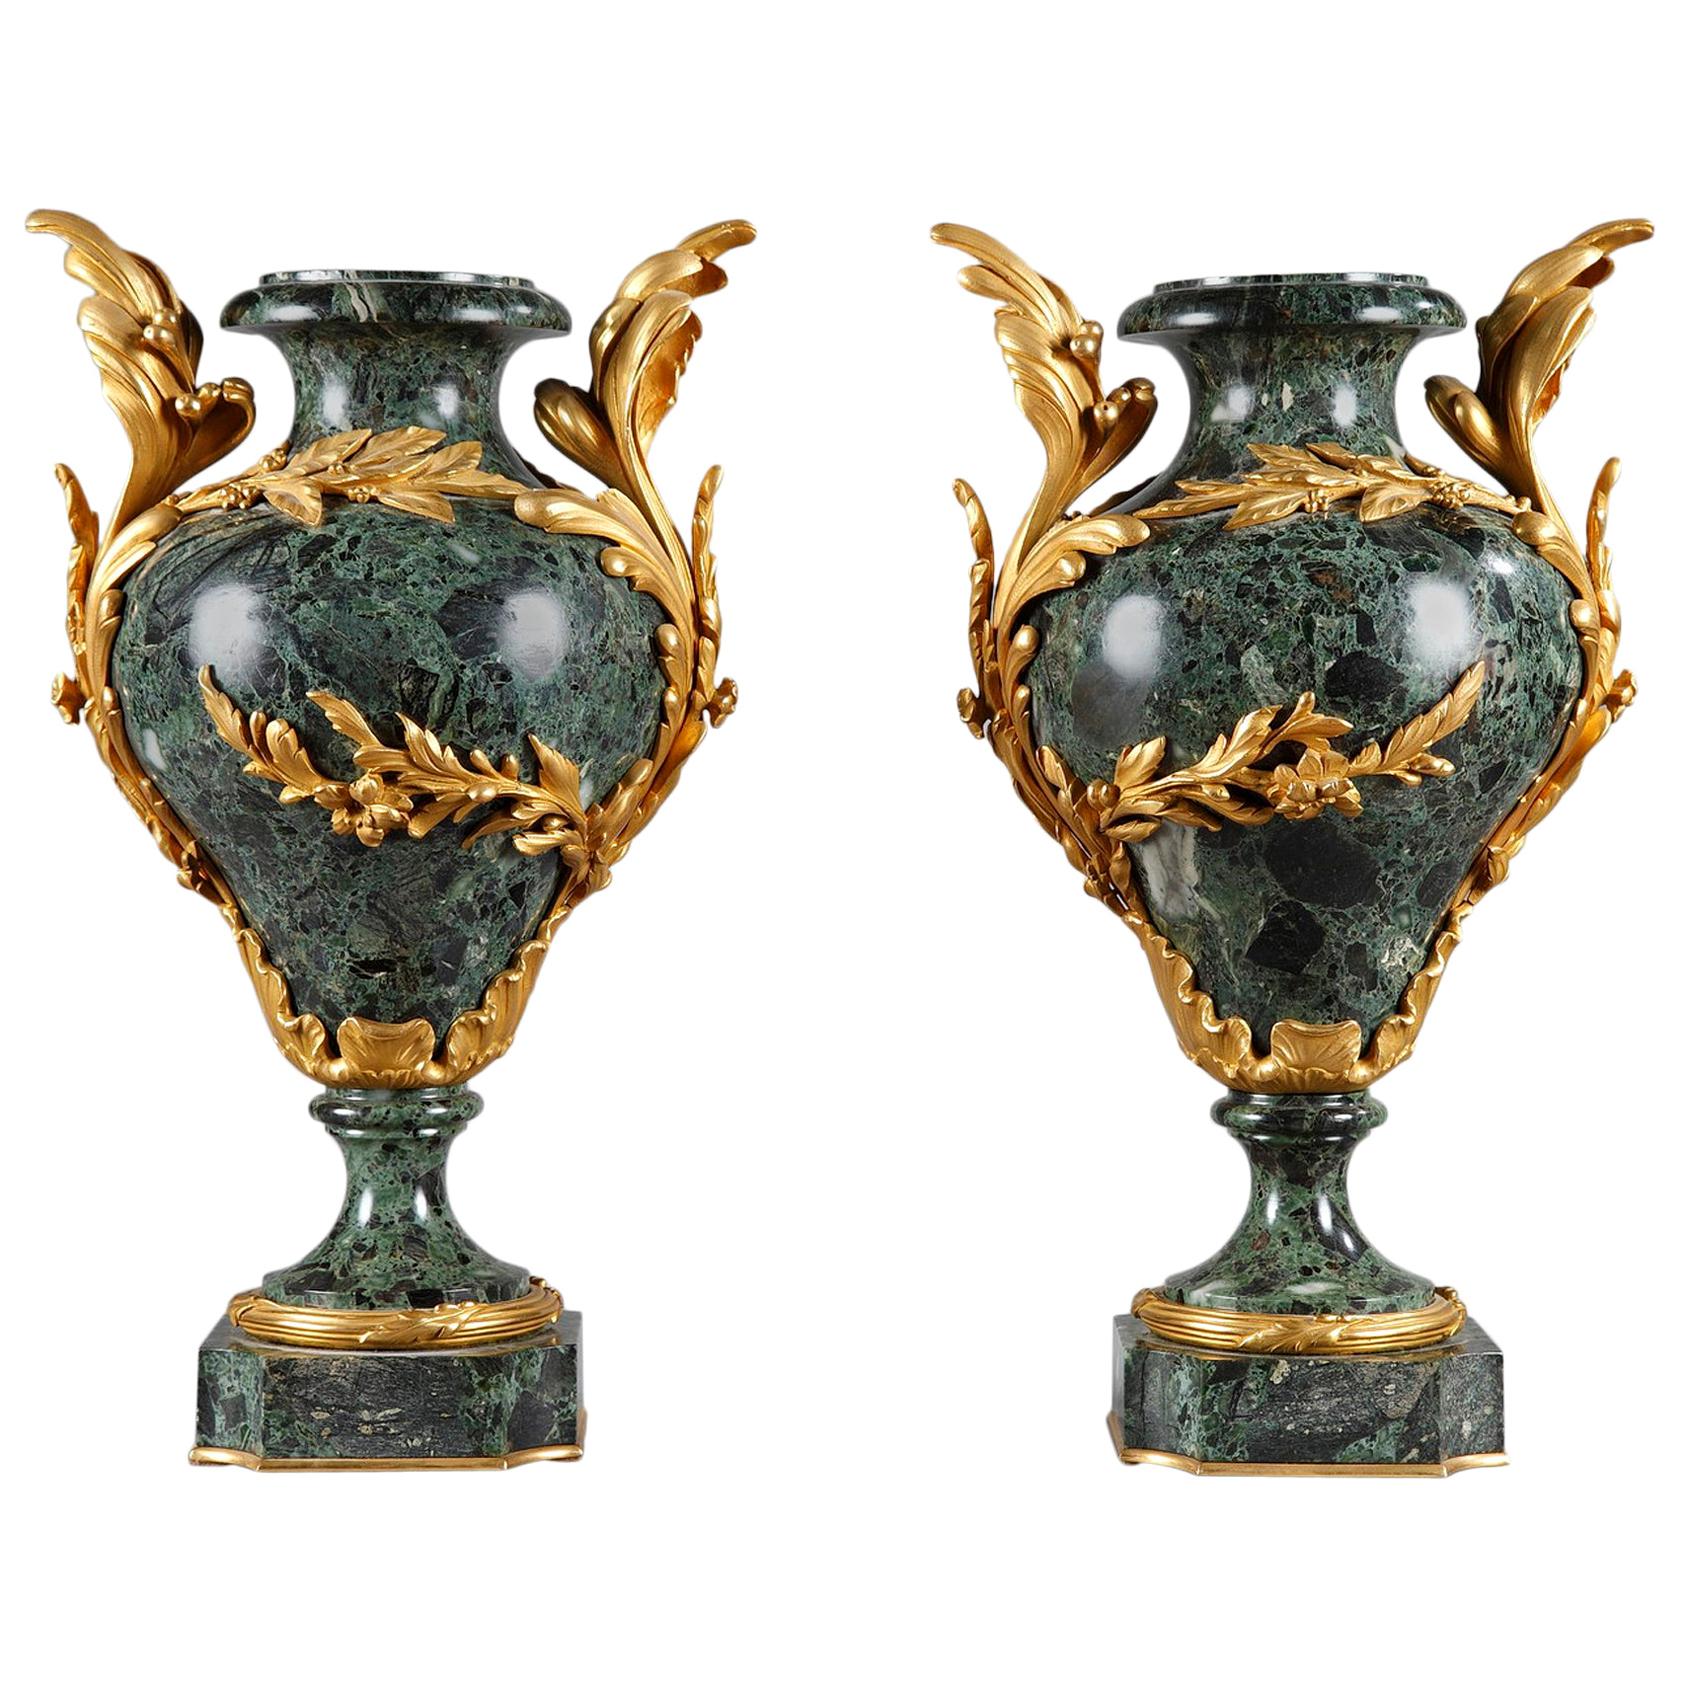 Pair of Late 19th Century Vases in Marble and Gilt Bronze